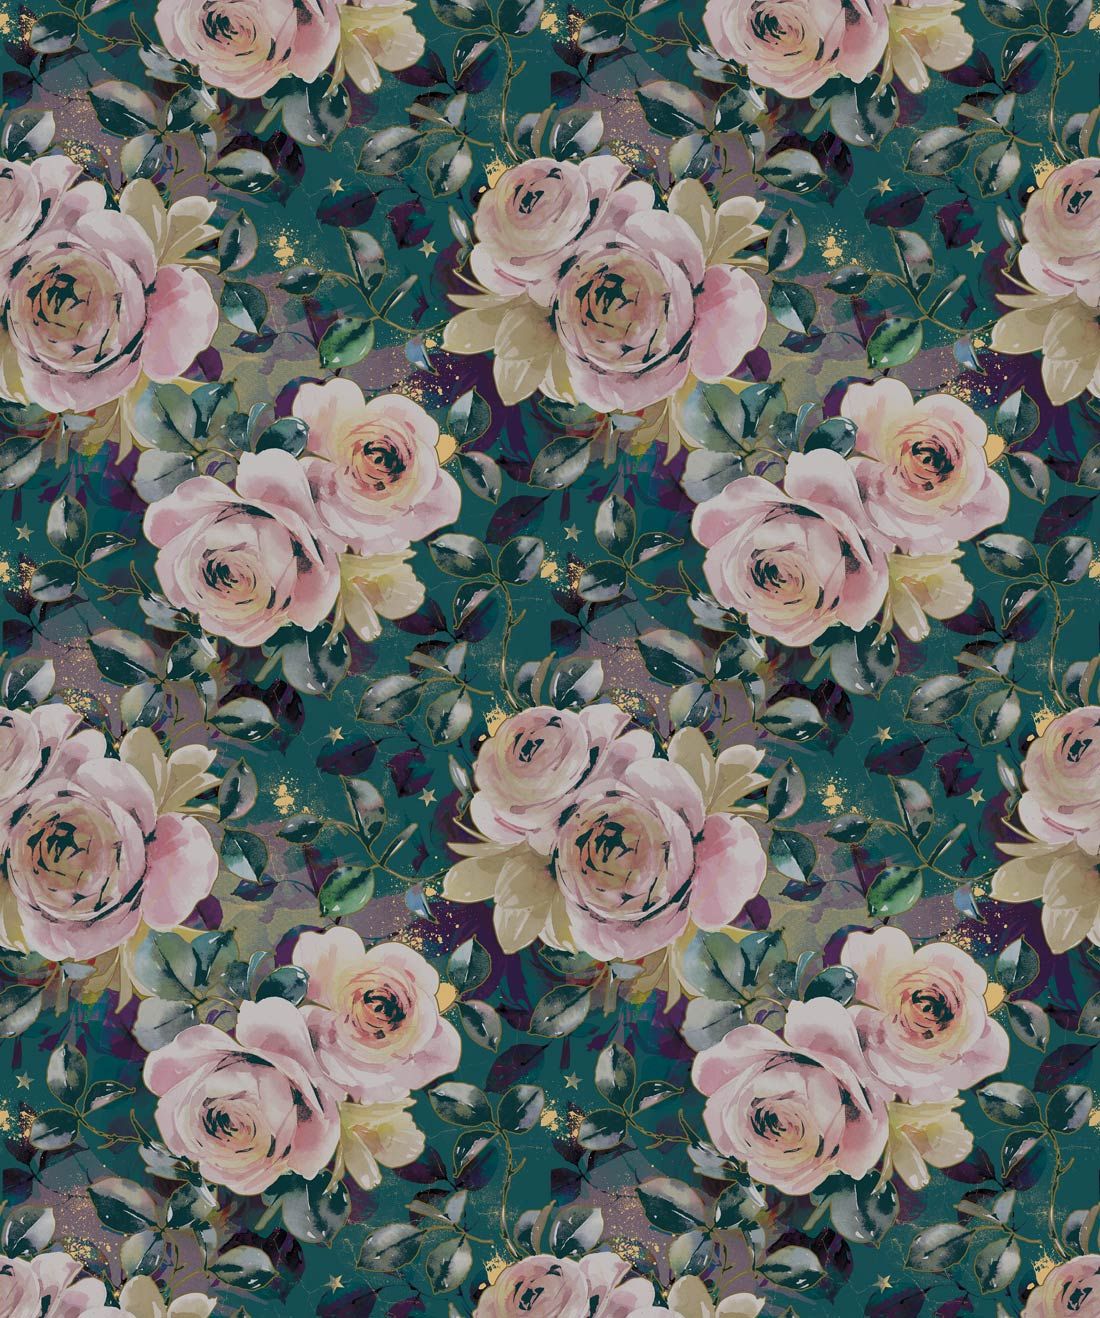 English Roses is an elegant floral wallpaper